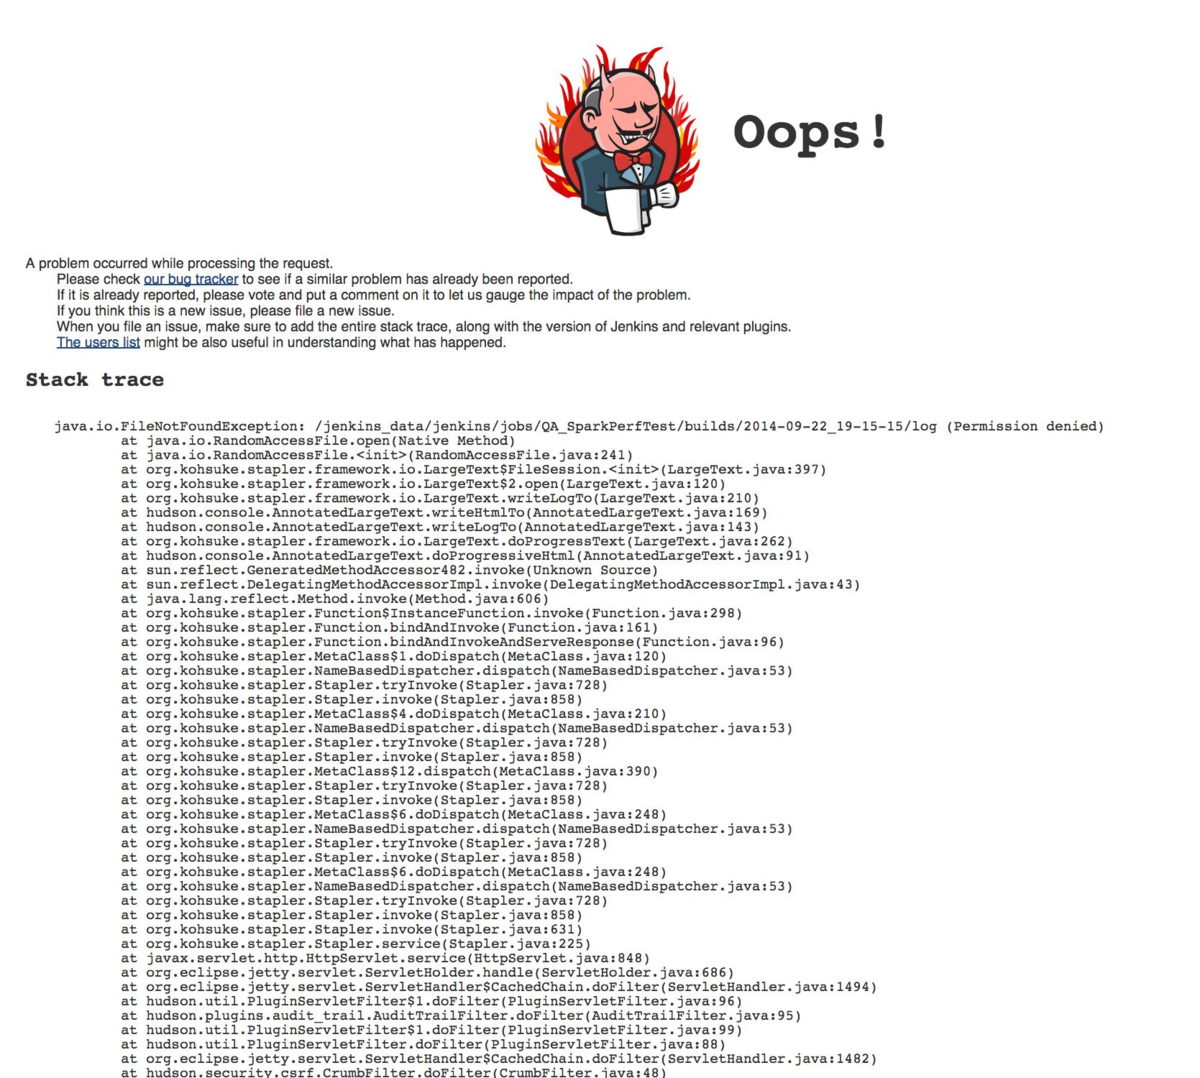 when things go wrong in Jenkins